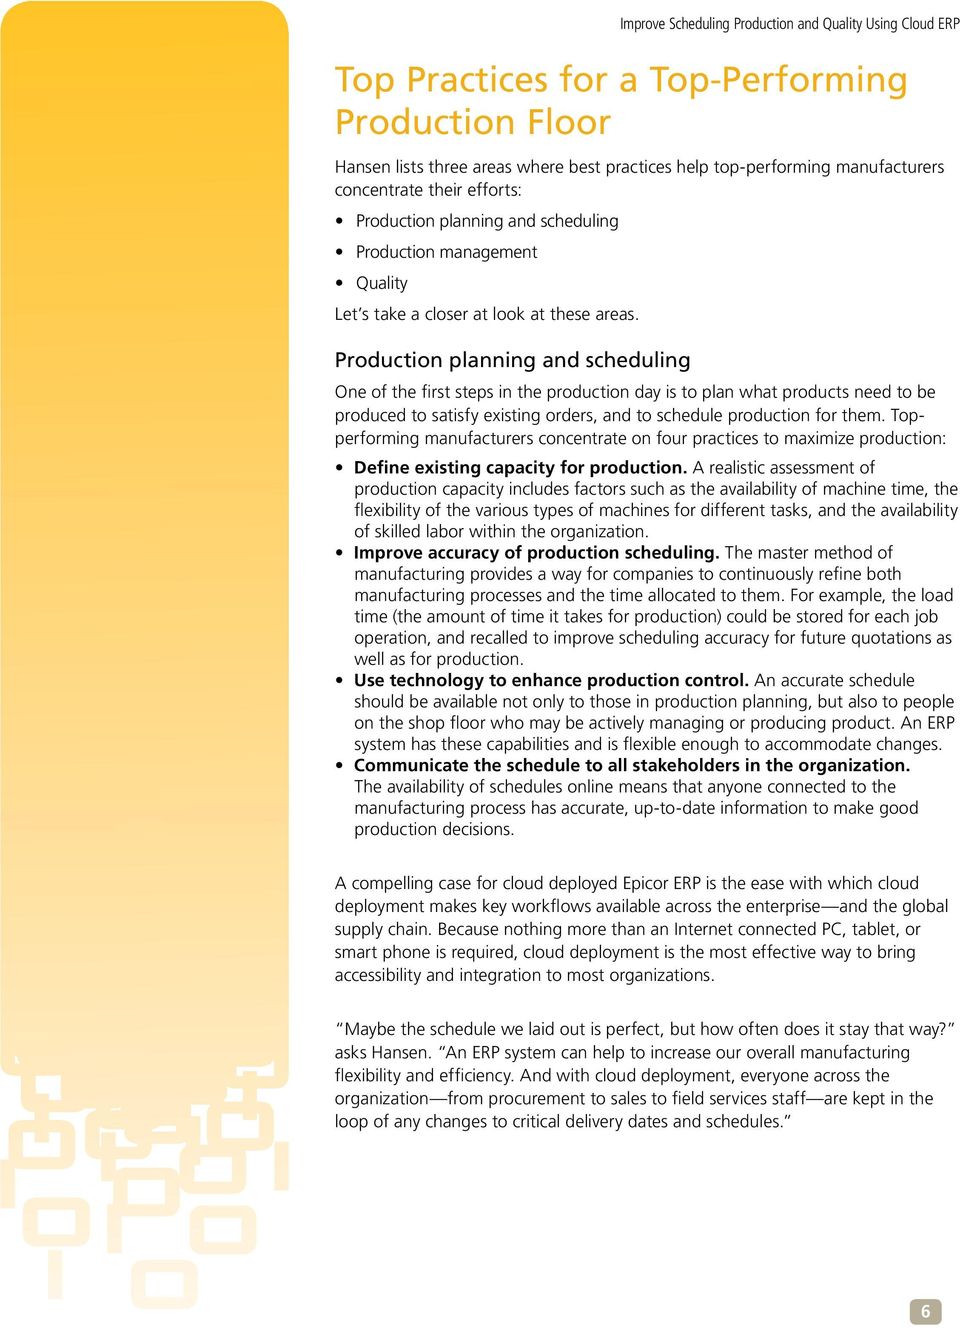 Improve Scheduling Production and Quality Using Cloud ERP Production planning and scheduling One of the first steps in the production day is to plan what products need to be produced to satisfy